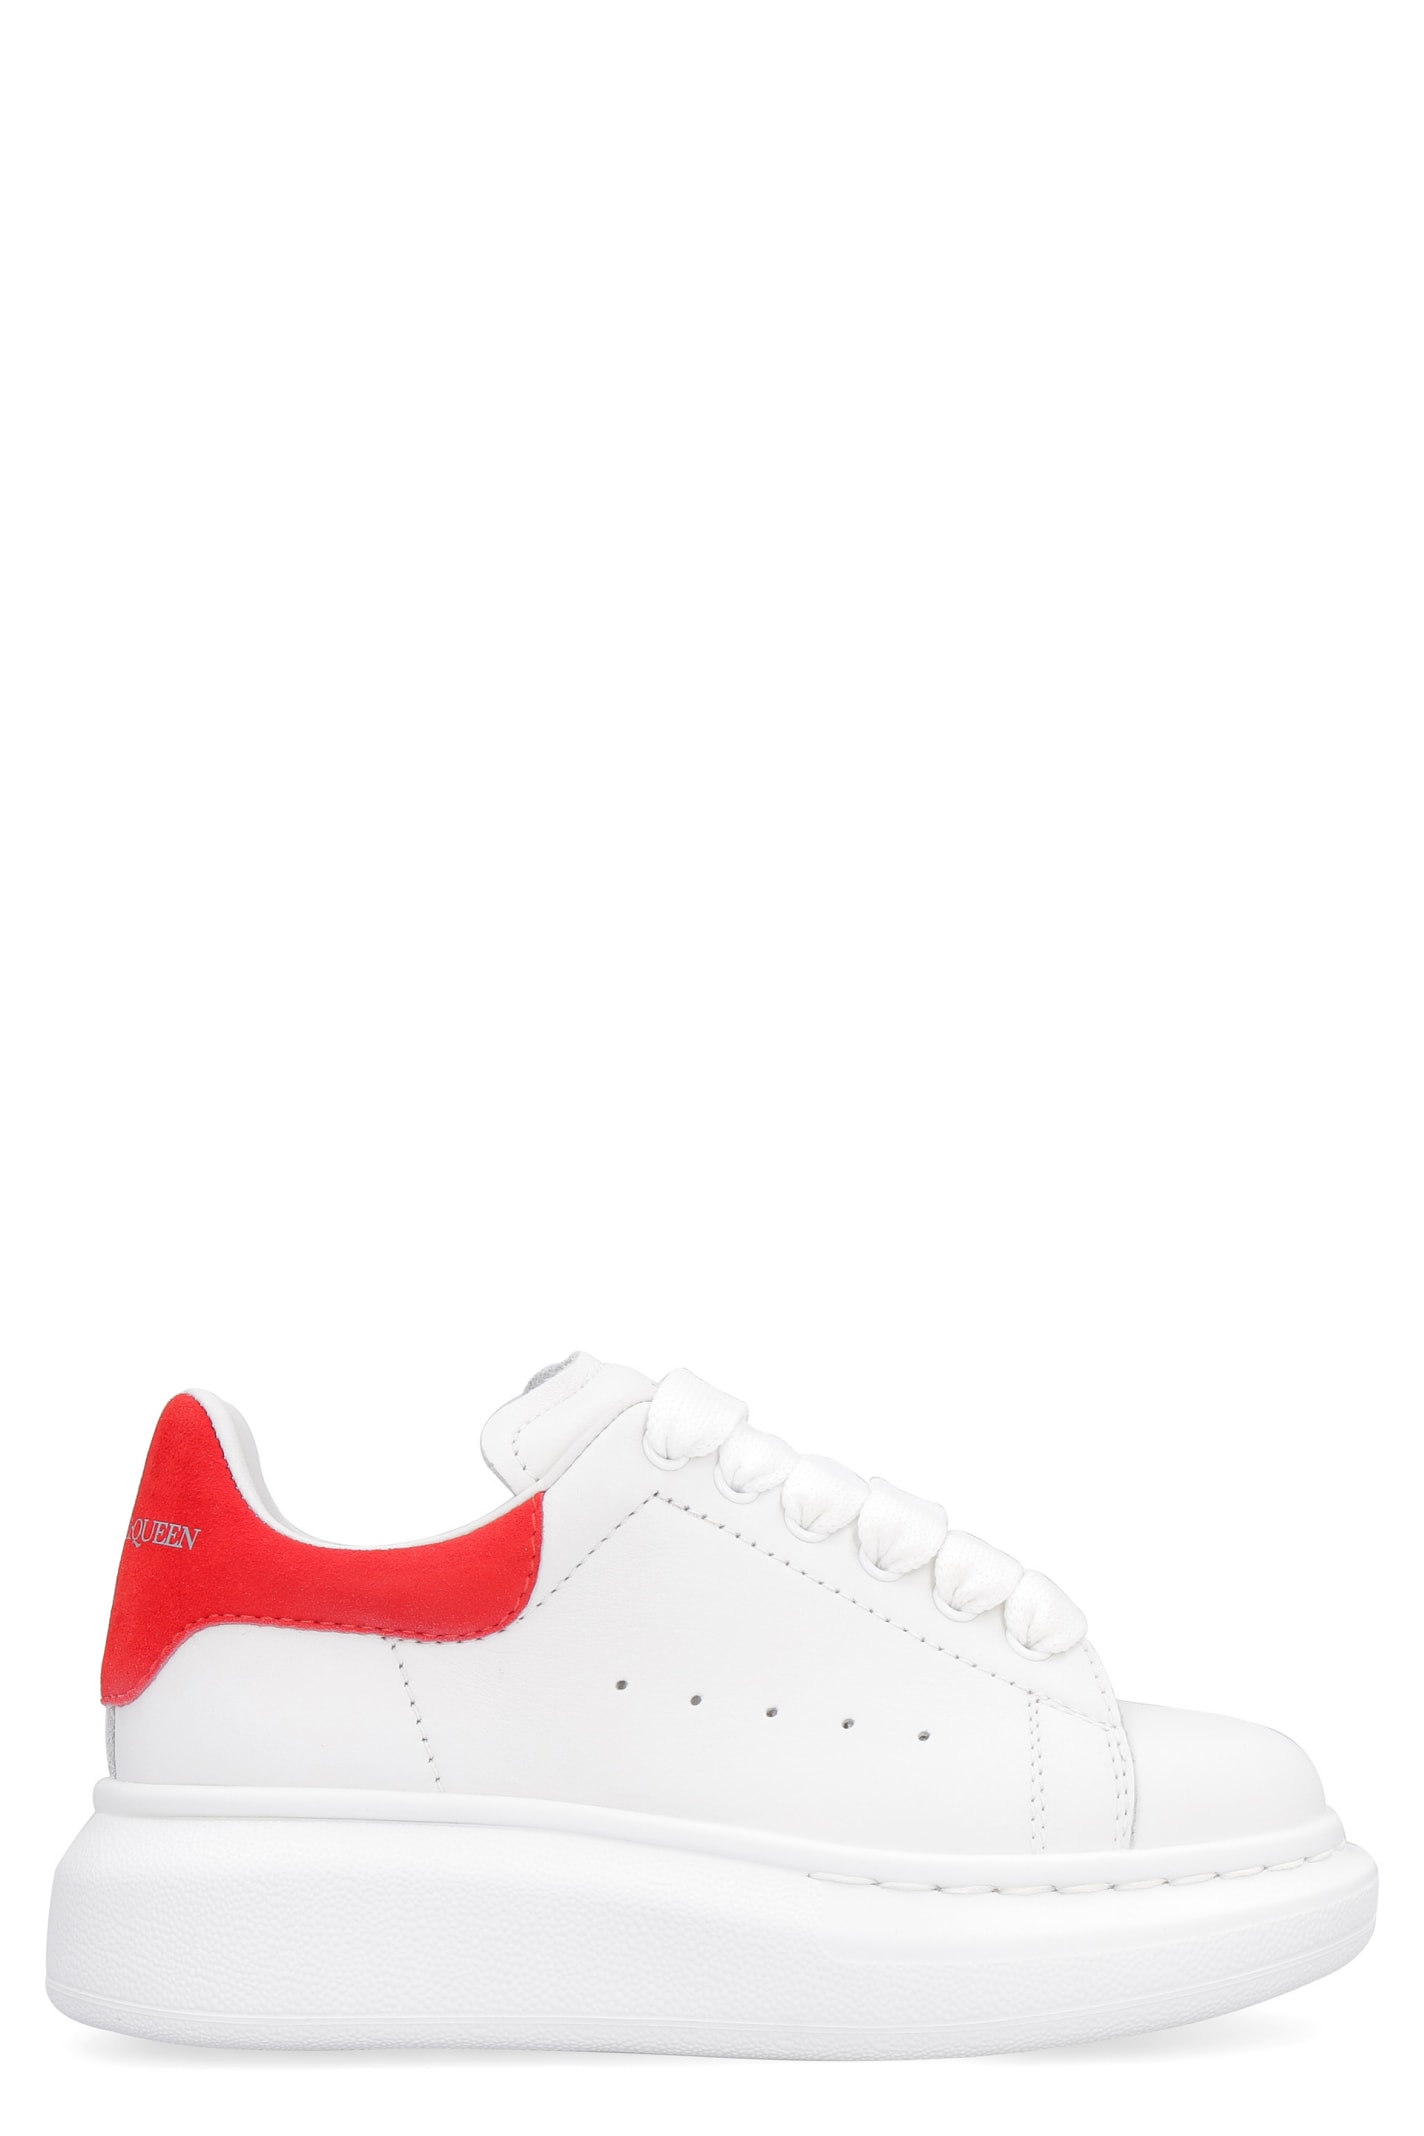 Buy Alexander McQueen Extended Sole Oversized Sneakers online, shop Alexander McQueen shoes with free shipping